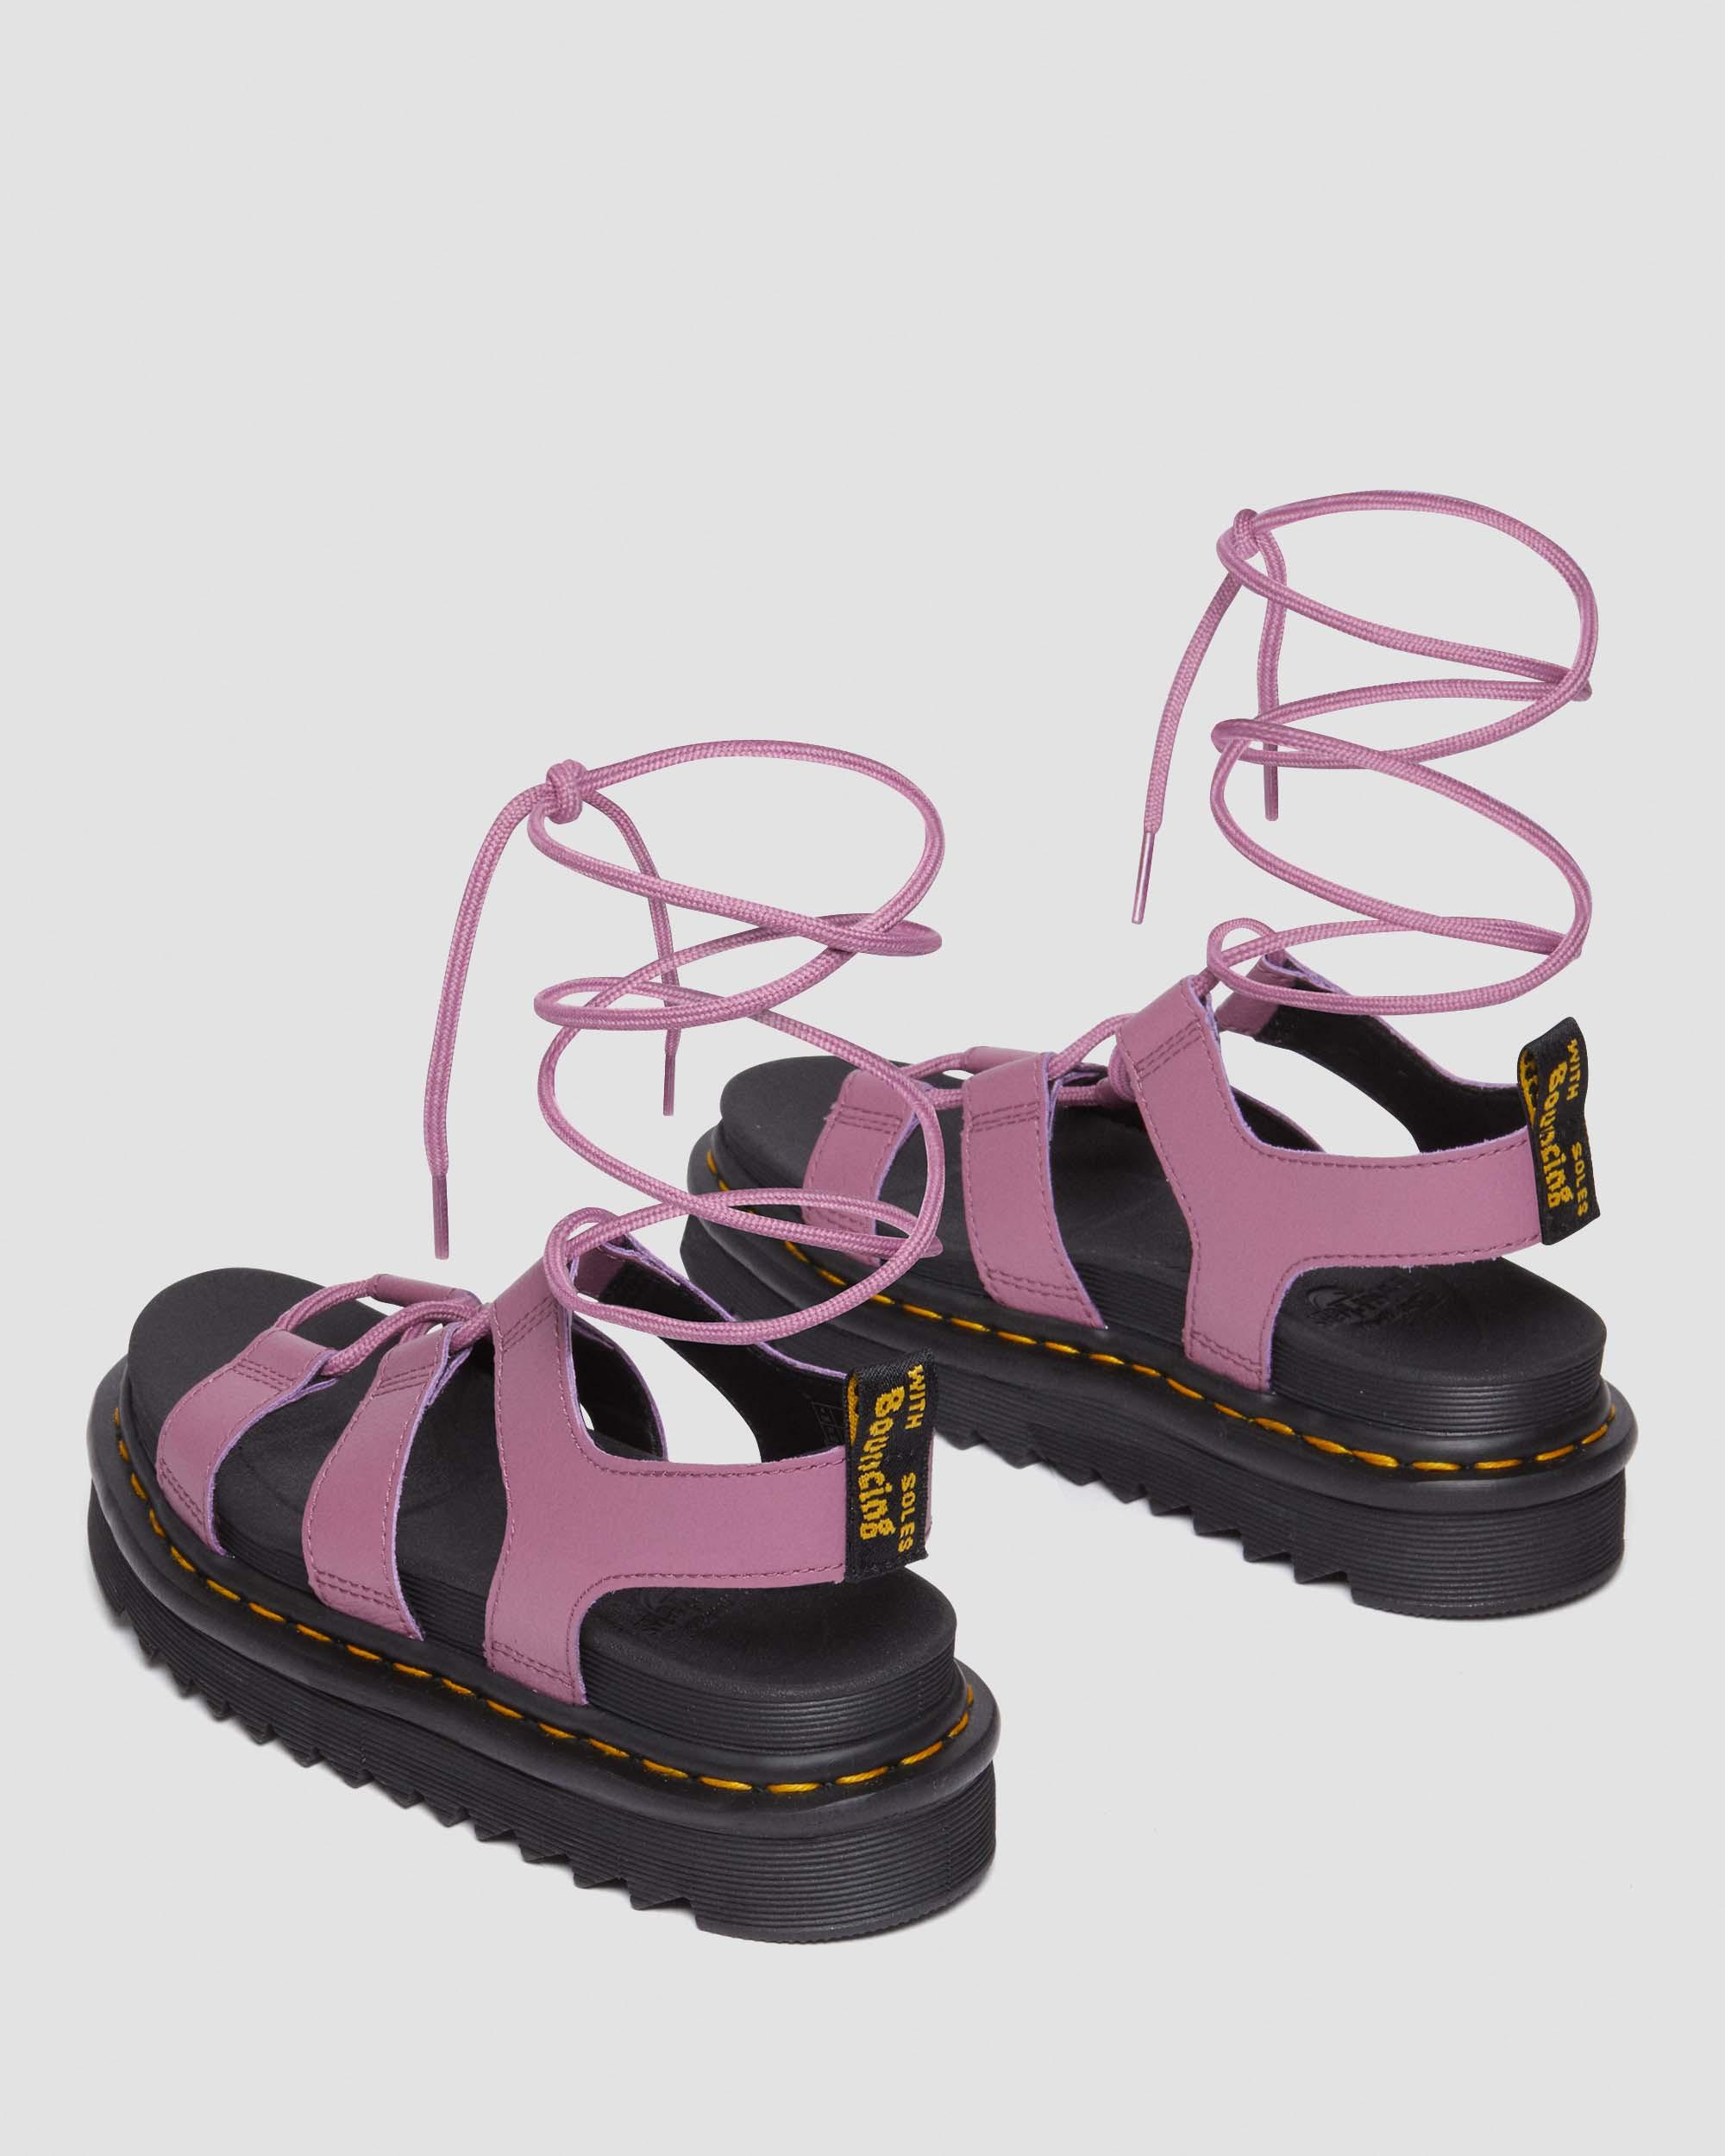 Nartilla Leather Gladiator Sandals in Muted Purple